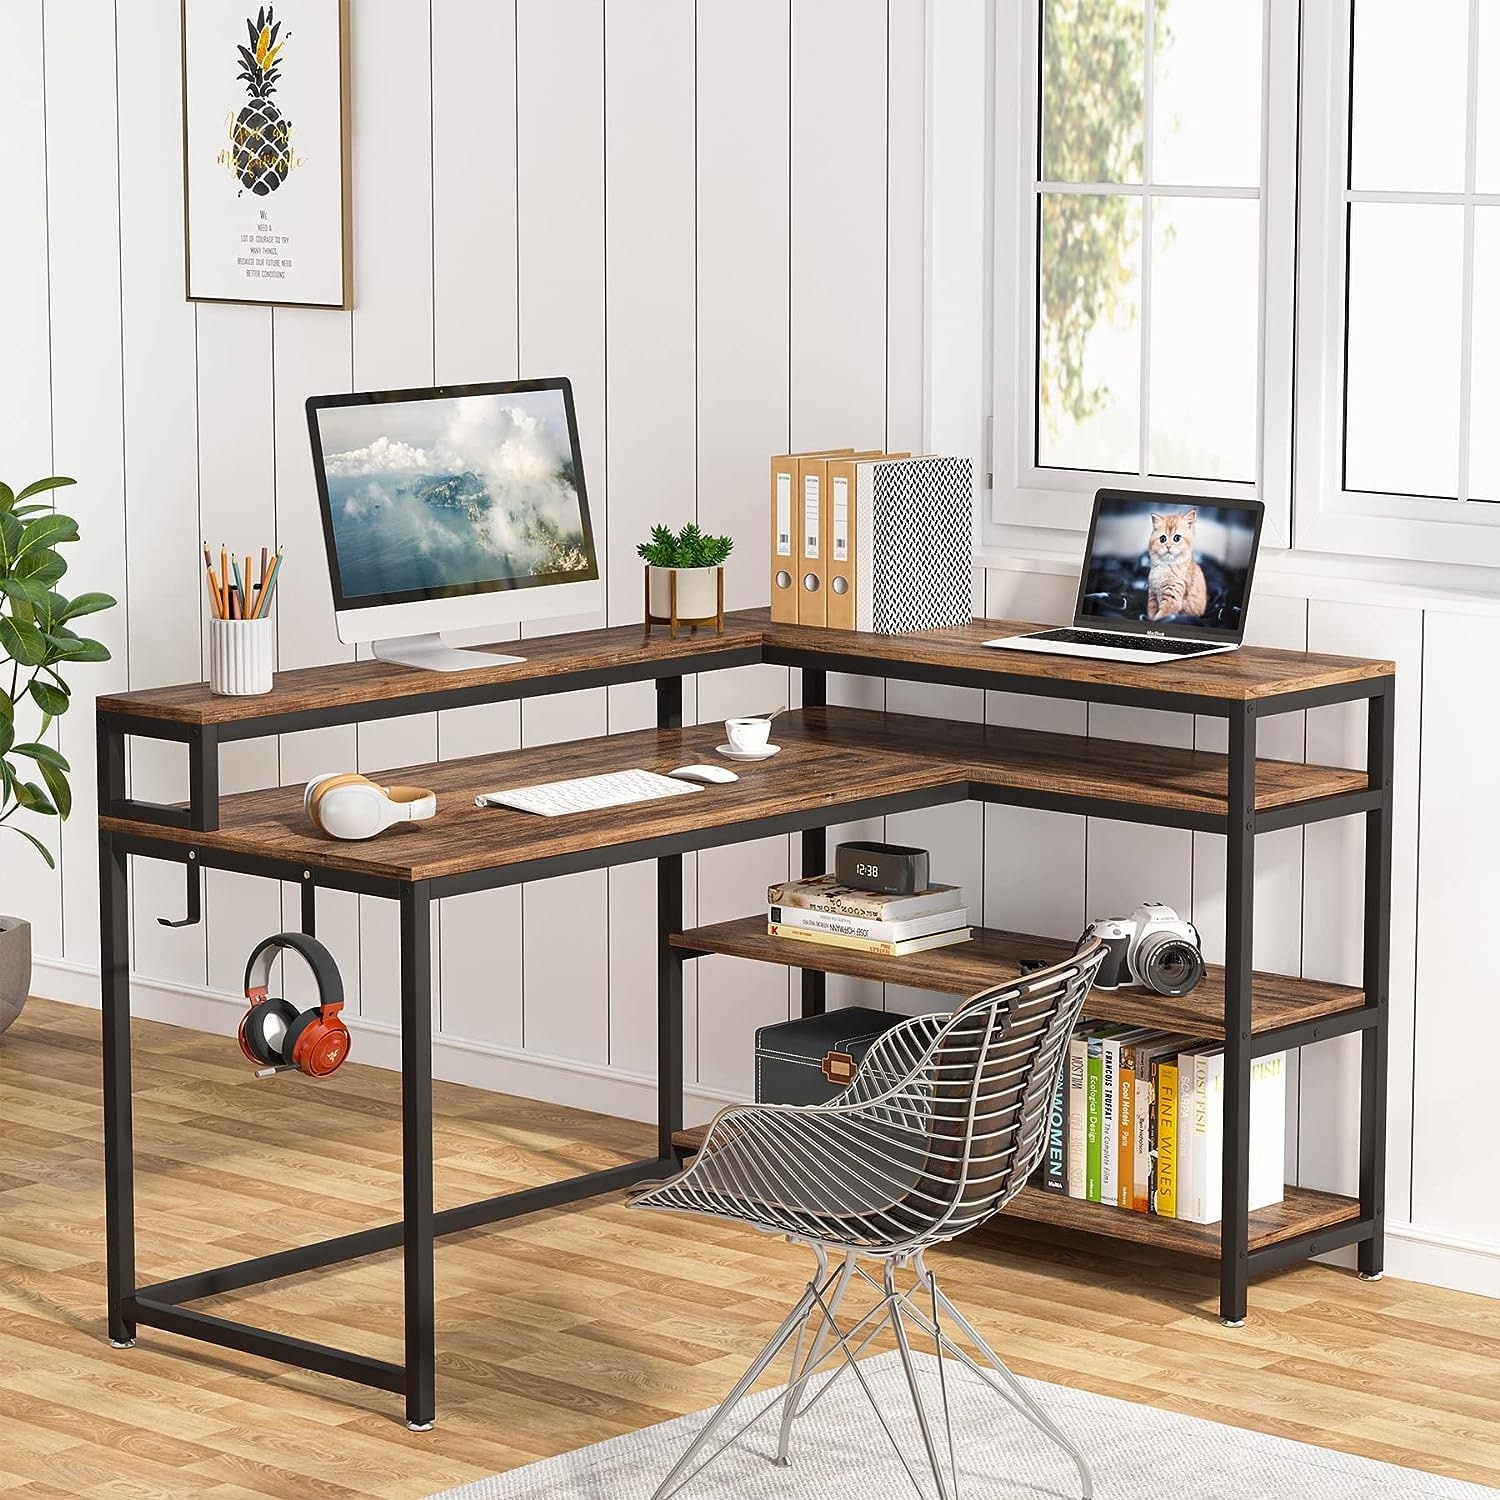 55/53 inch Reversible L Shaped Desk with Storage Shelf and Monitor